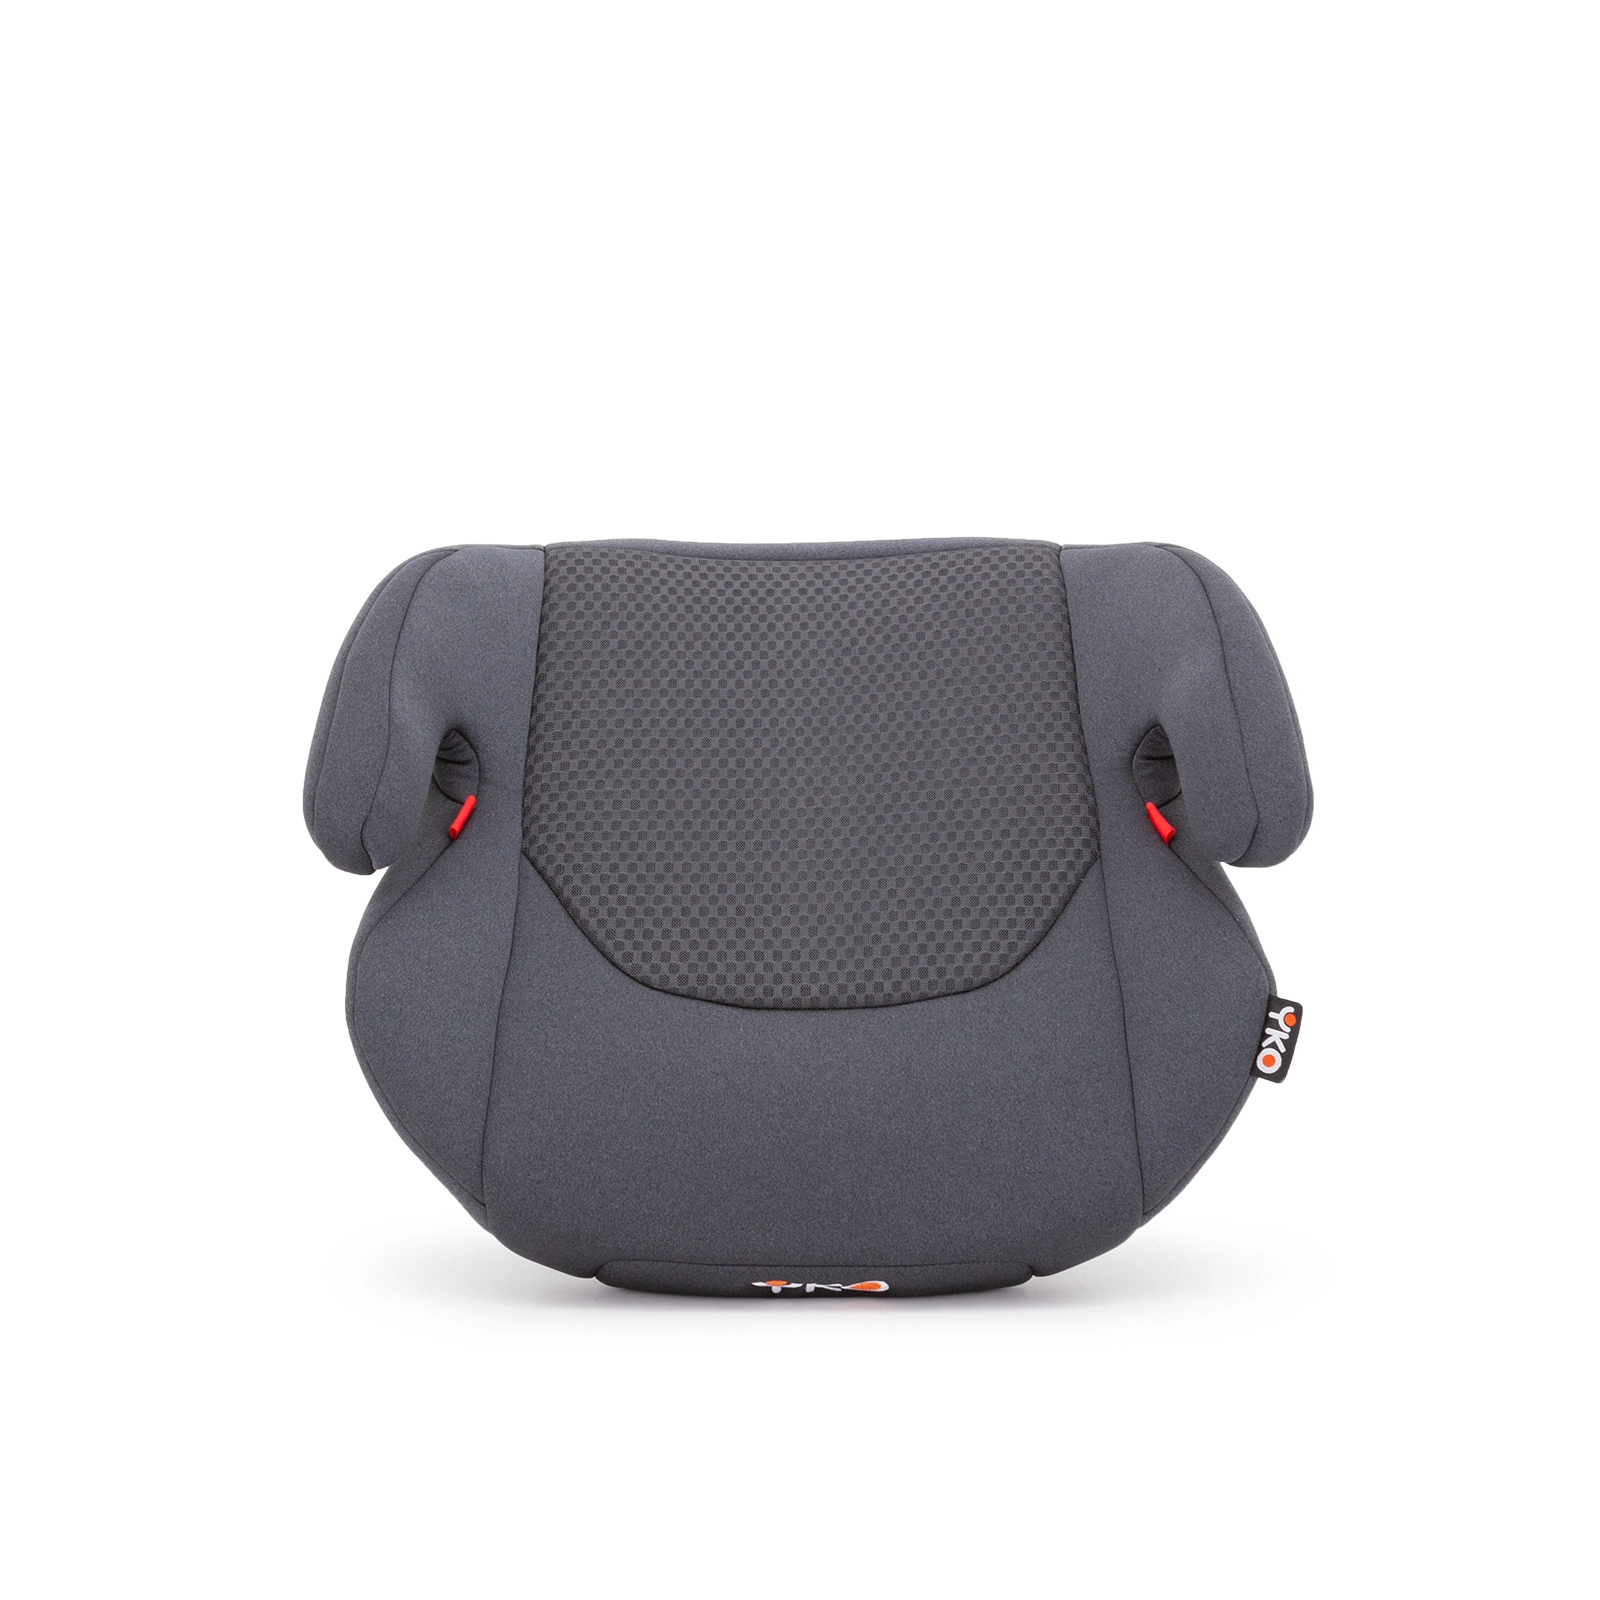 Portable Low-Back Cushion Seat for Travel